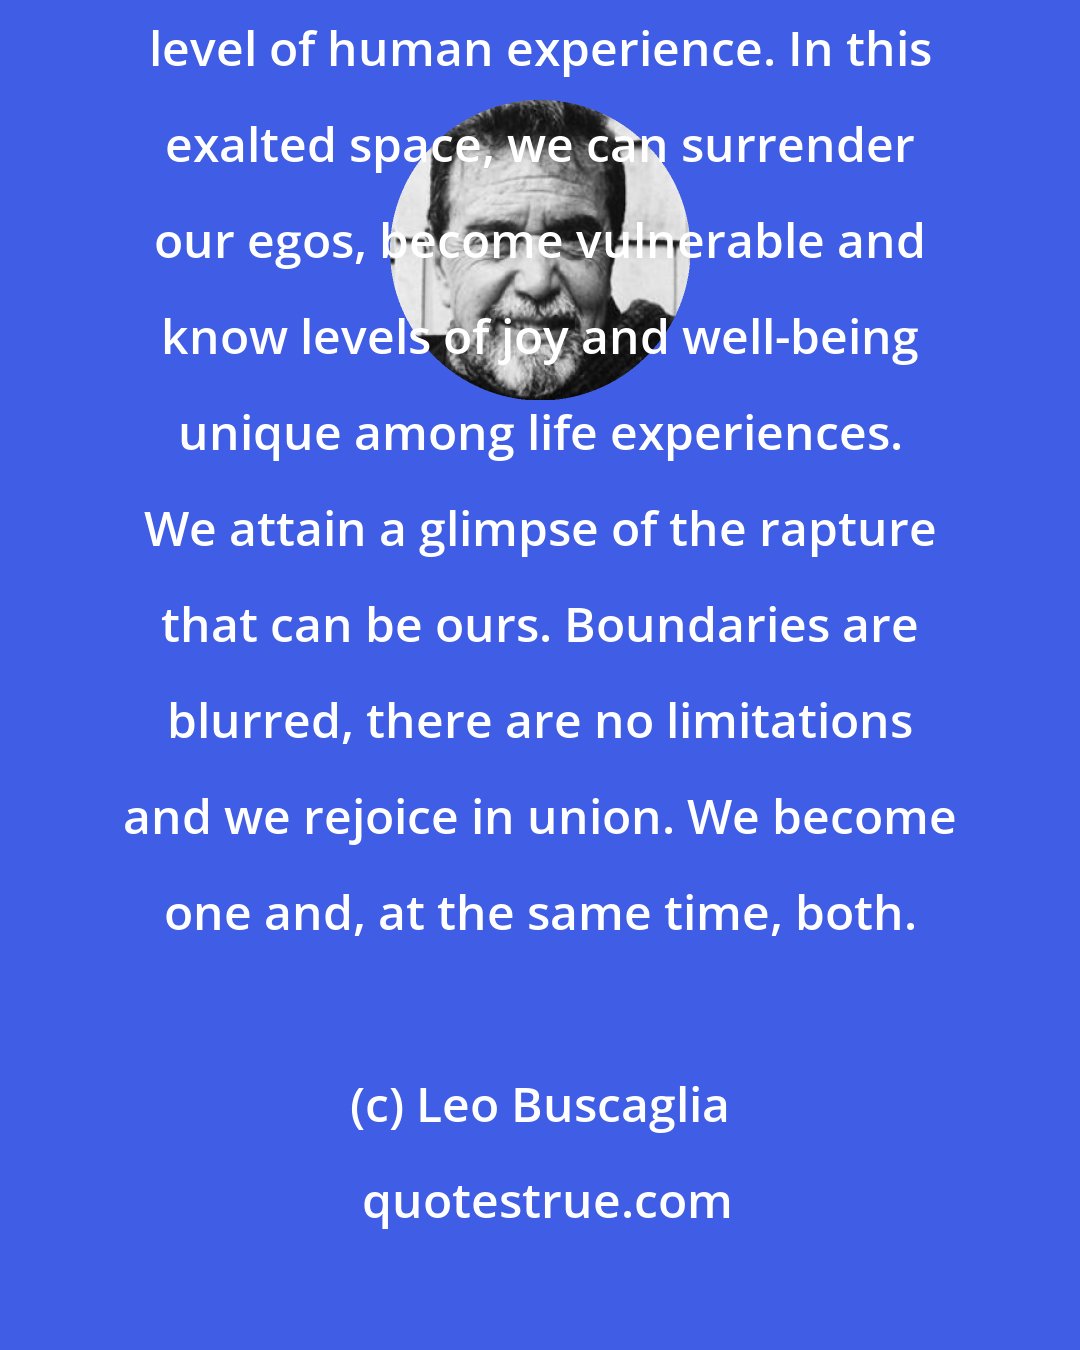 Leo Buscaglia: When love is accompanied with deep intimacy, it raises us to the highest level of human experience. In this exalted space, we can surrender our egos, become vulnerable and know levels of joy and well-being unique among life experiences. We attain a glimpse of the rapture that can be ours. Boundaries are blurred, there are no limitations and we rejoice in union. We become one and, at the same time, both.